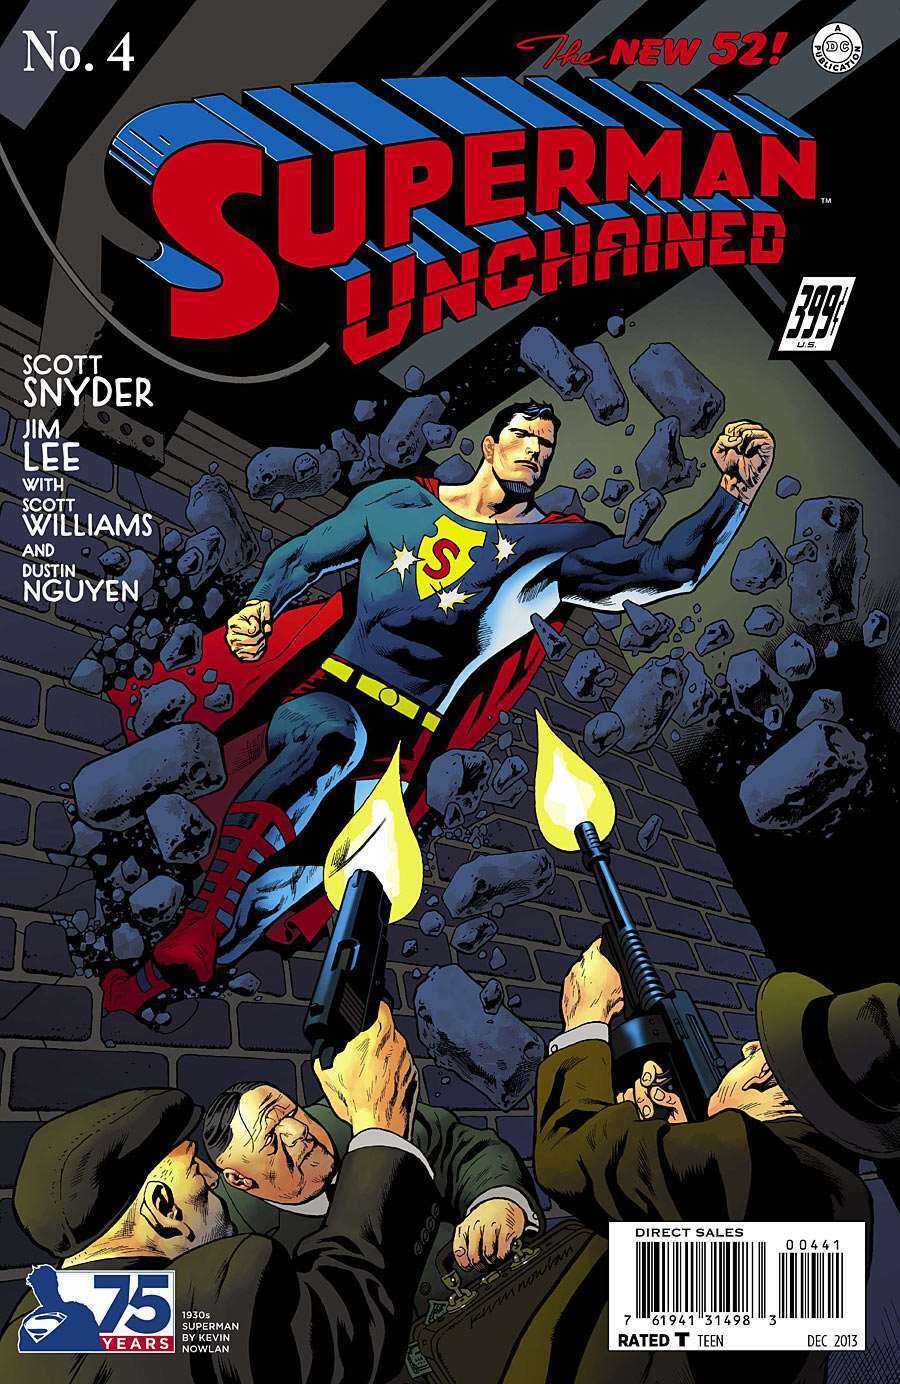 Superman Unchained #4C VF/NM; DC | New 52 - 1:100 variant by Kevin Nowlan - we c